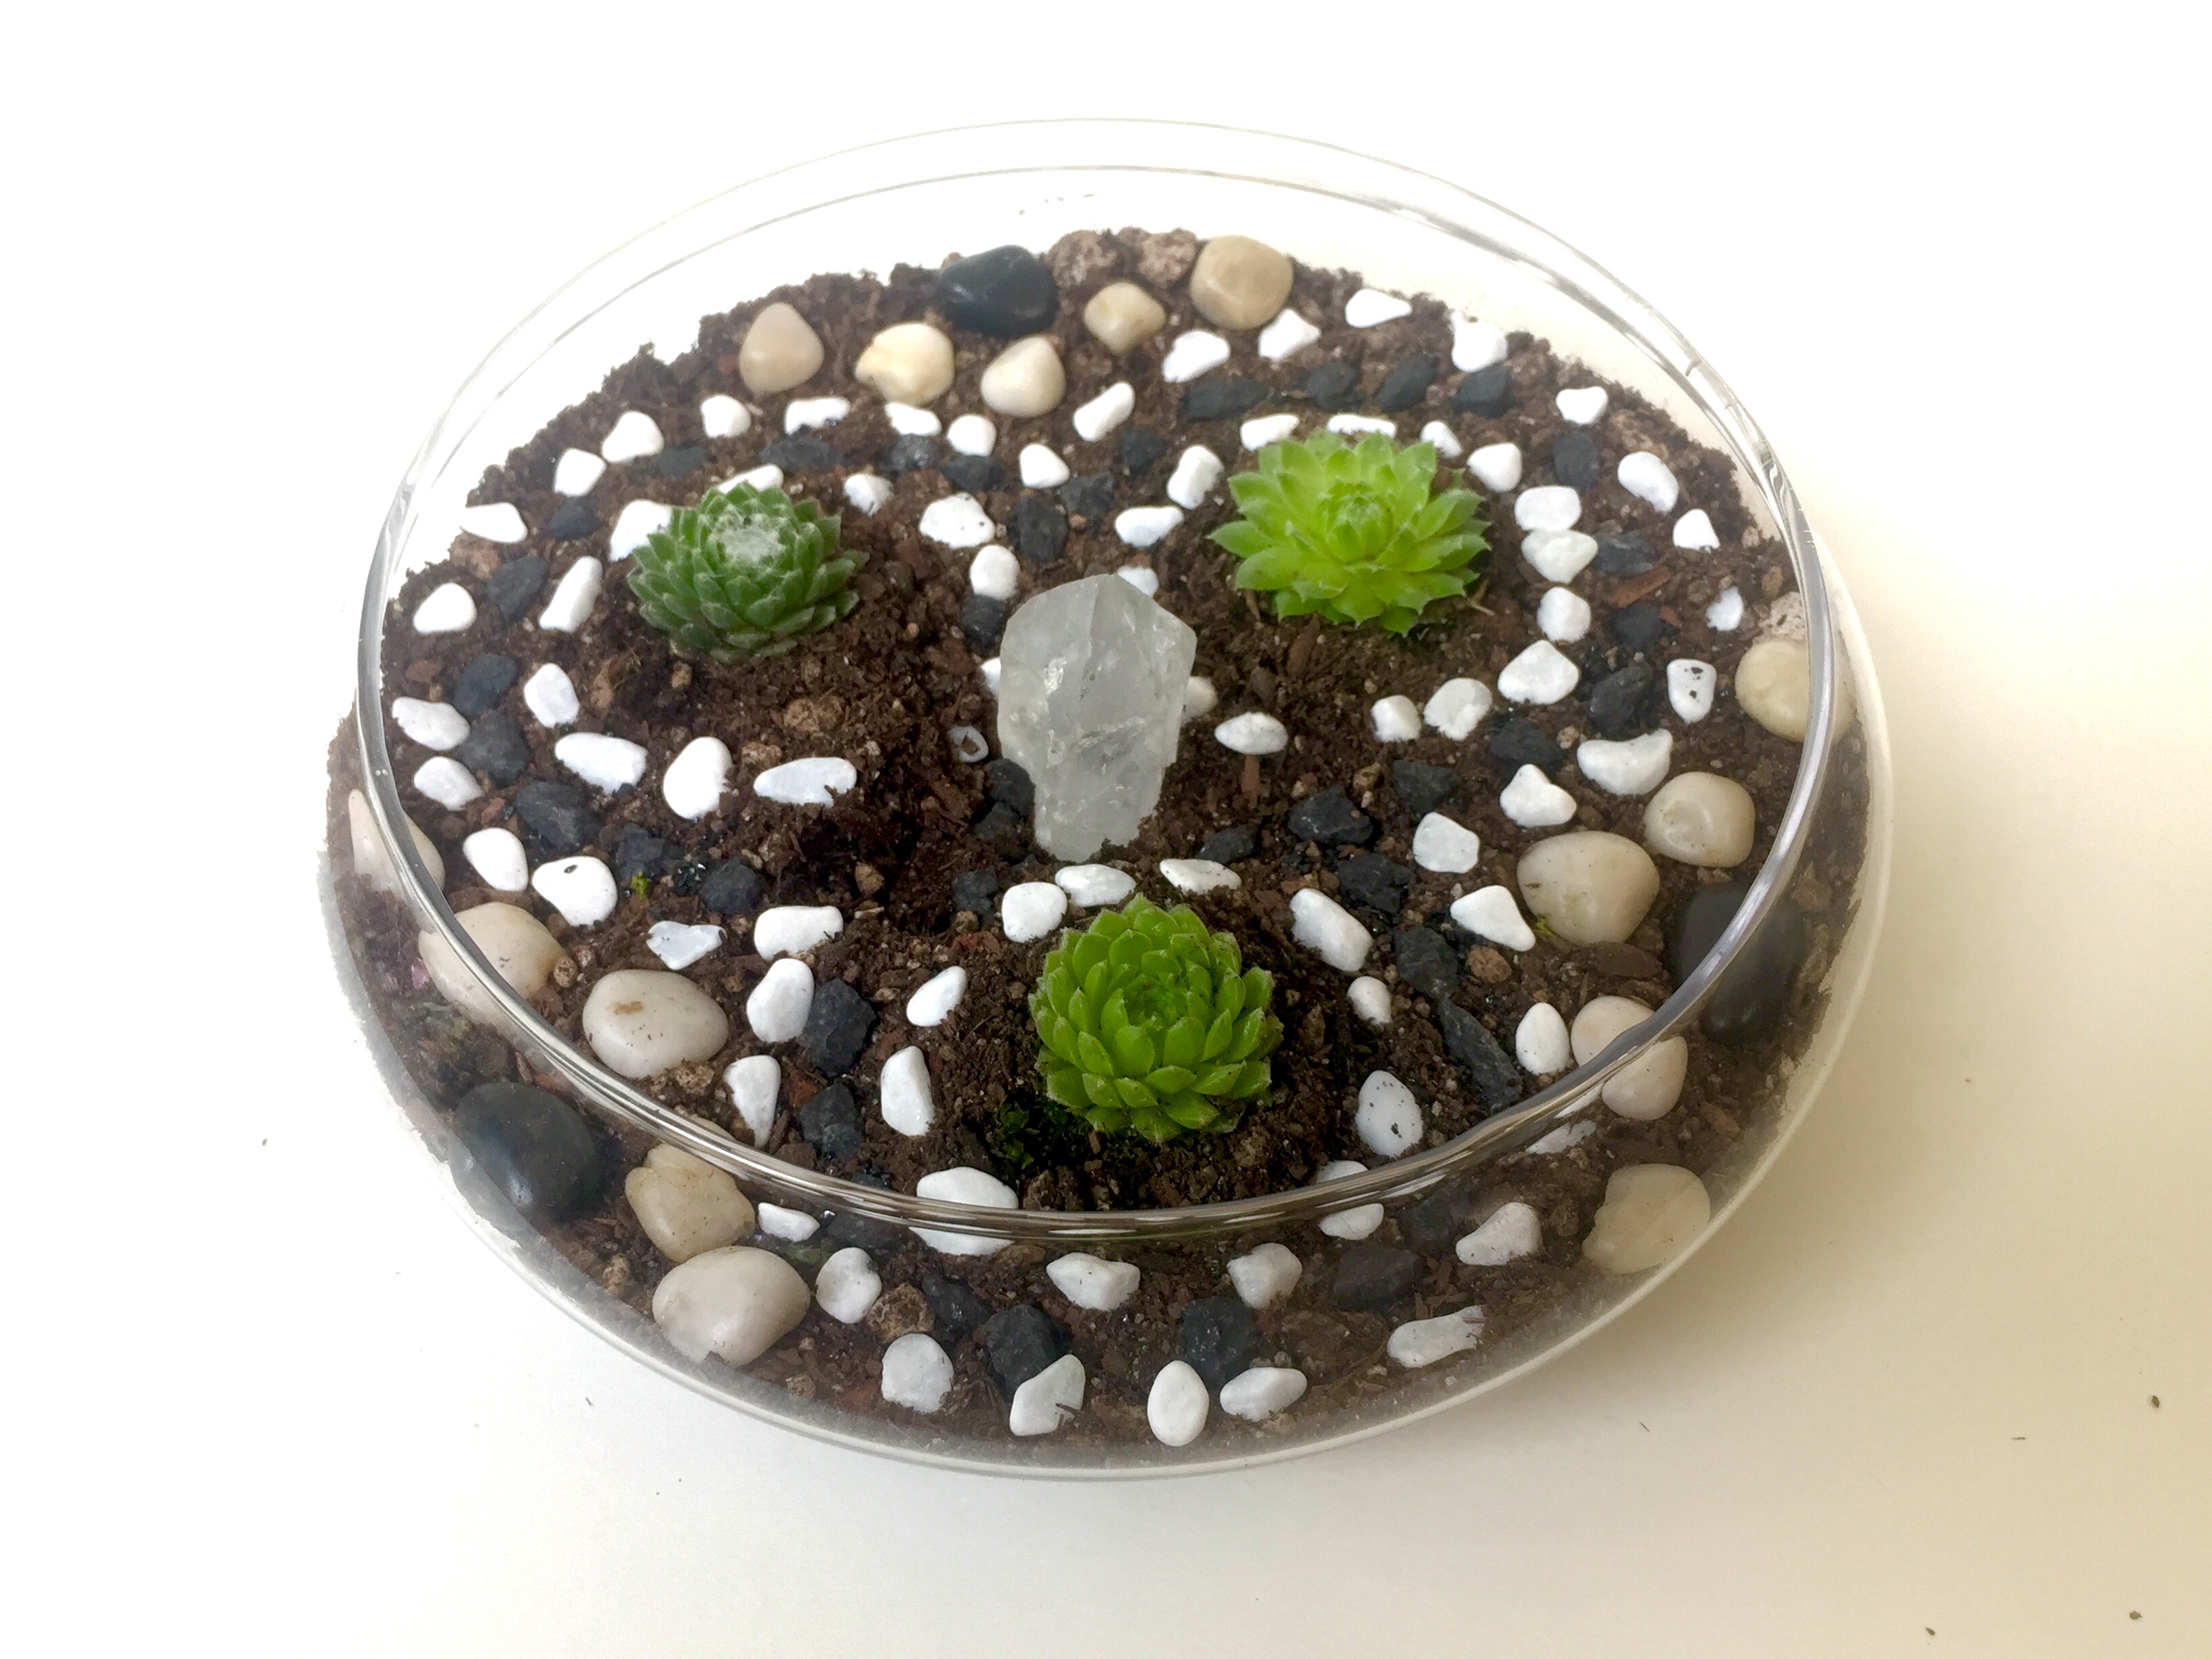 A Glass Lily Bowl Floral Rock Design Succulent Terrarium with Clear Quartz Crystal plant nite project by Yaymaker